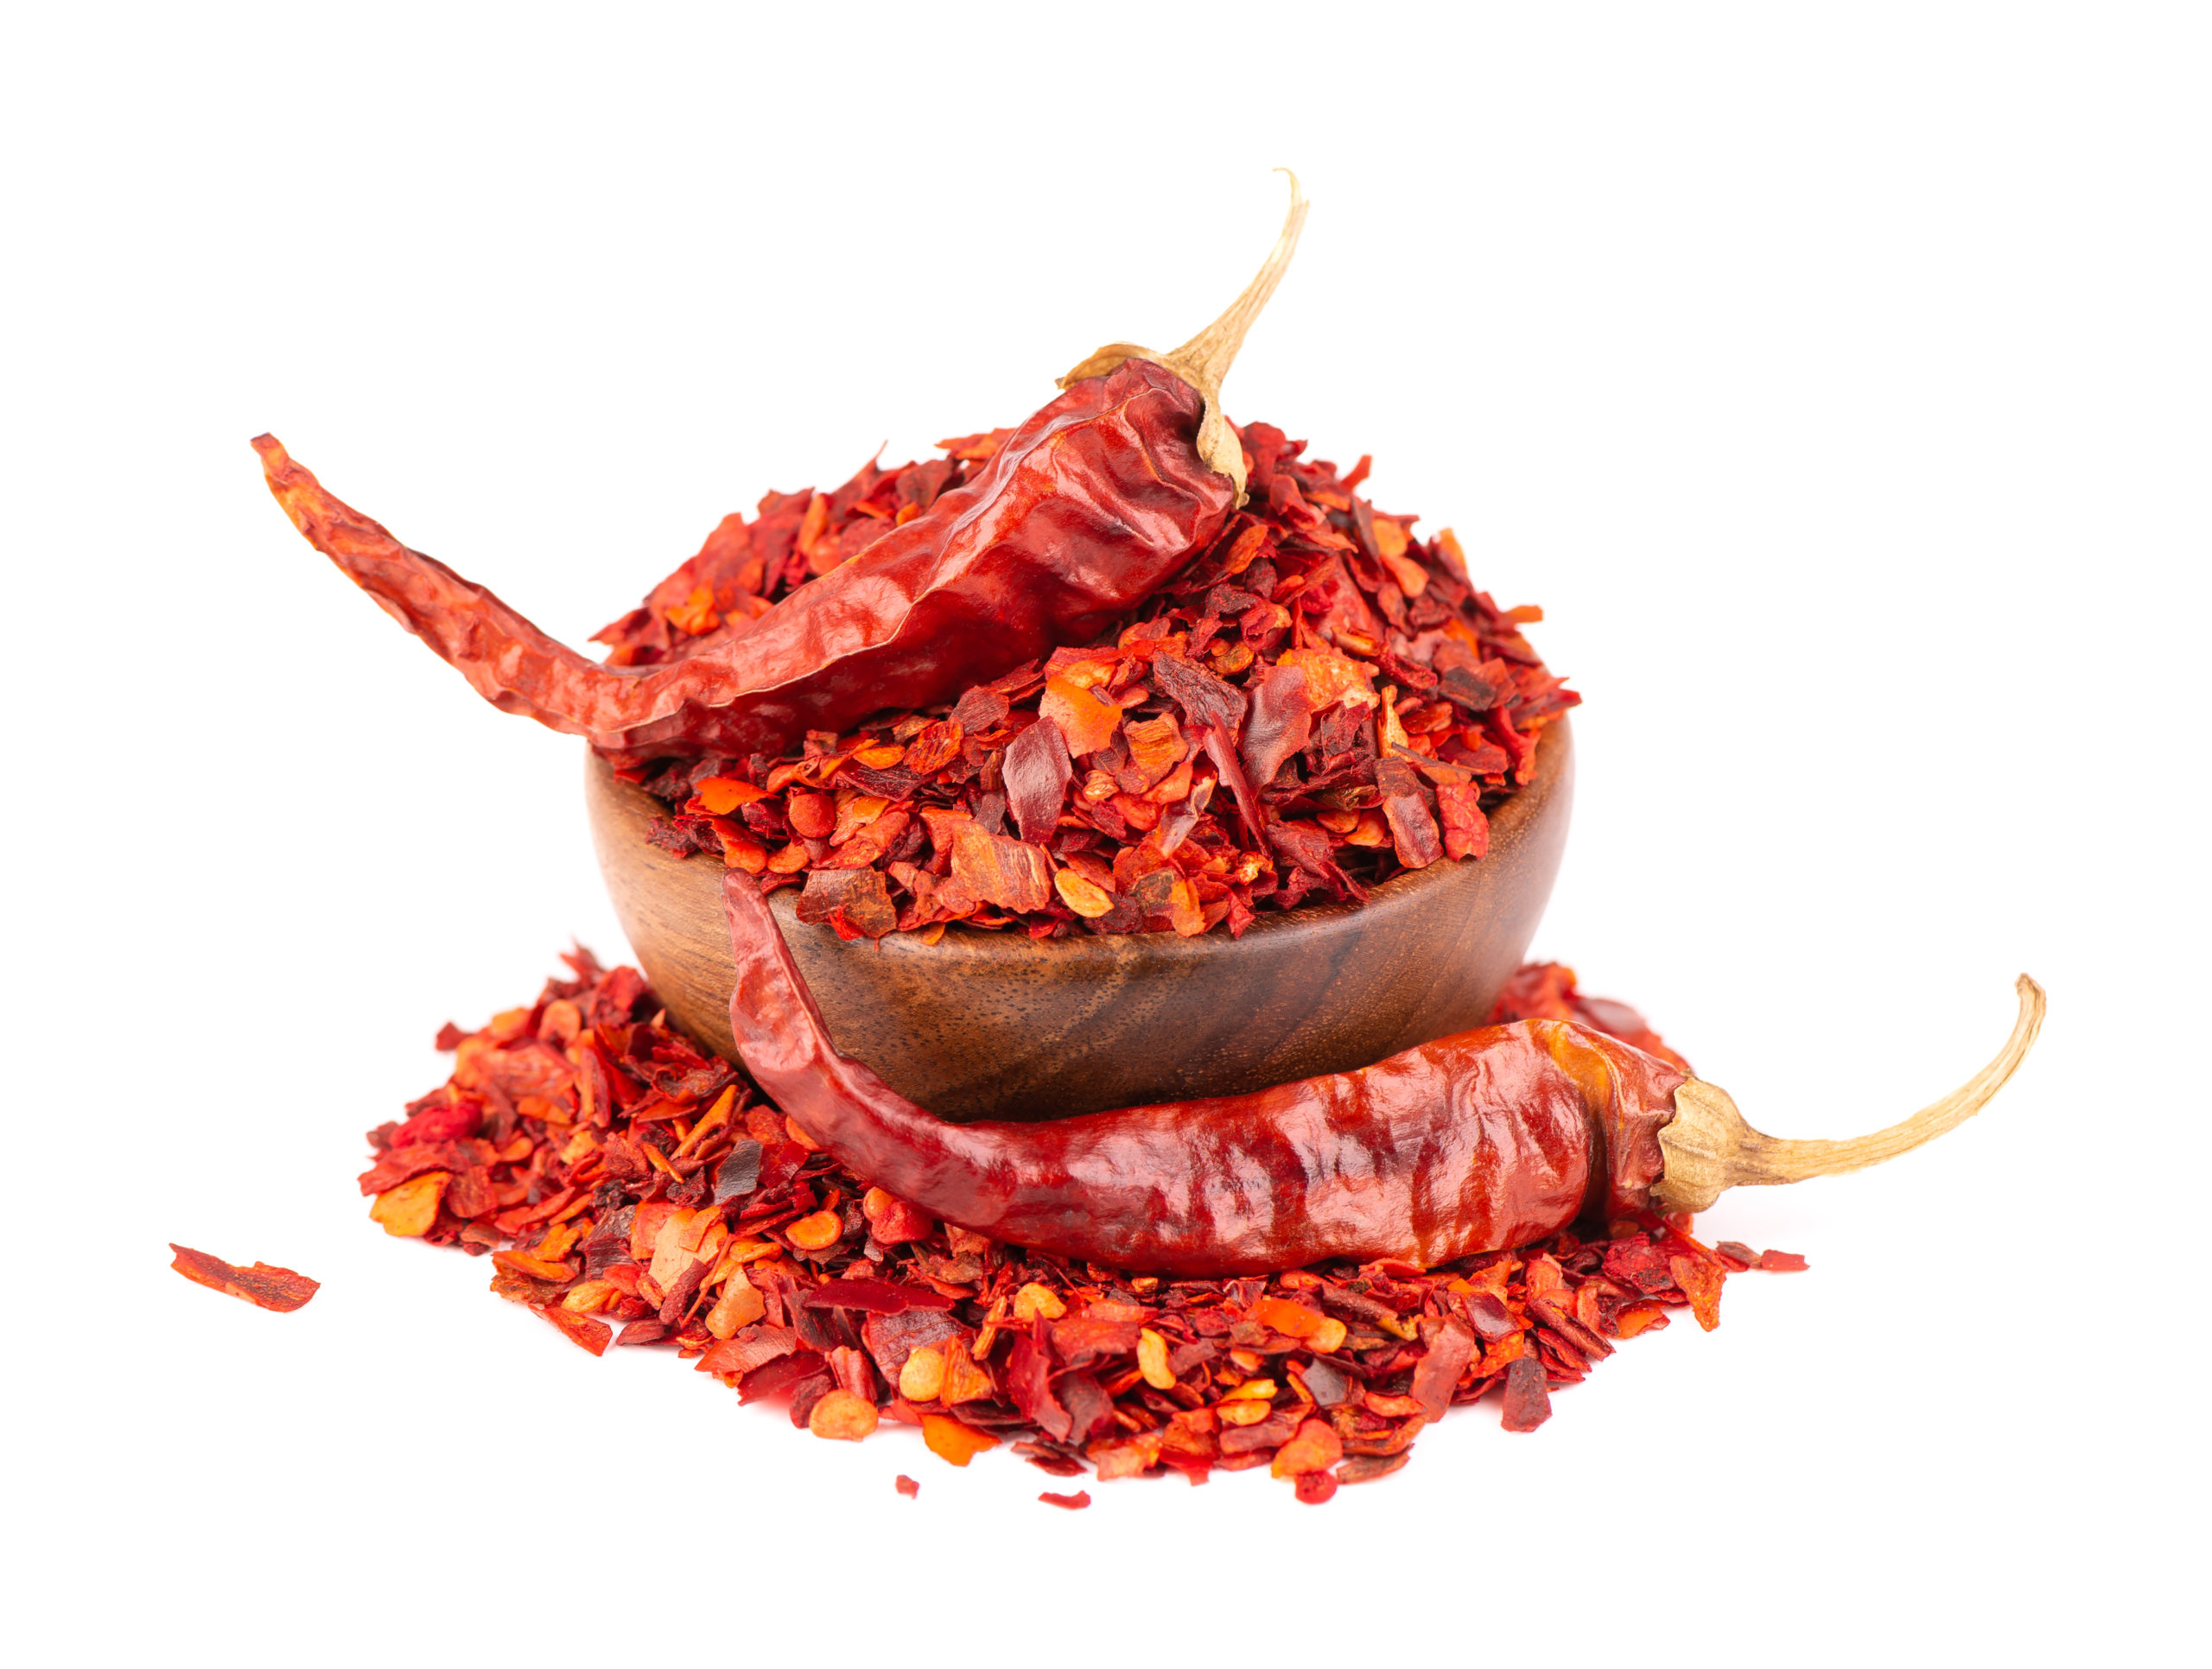 Image of chili pepper and chili flakes.